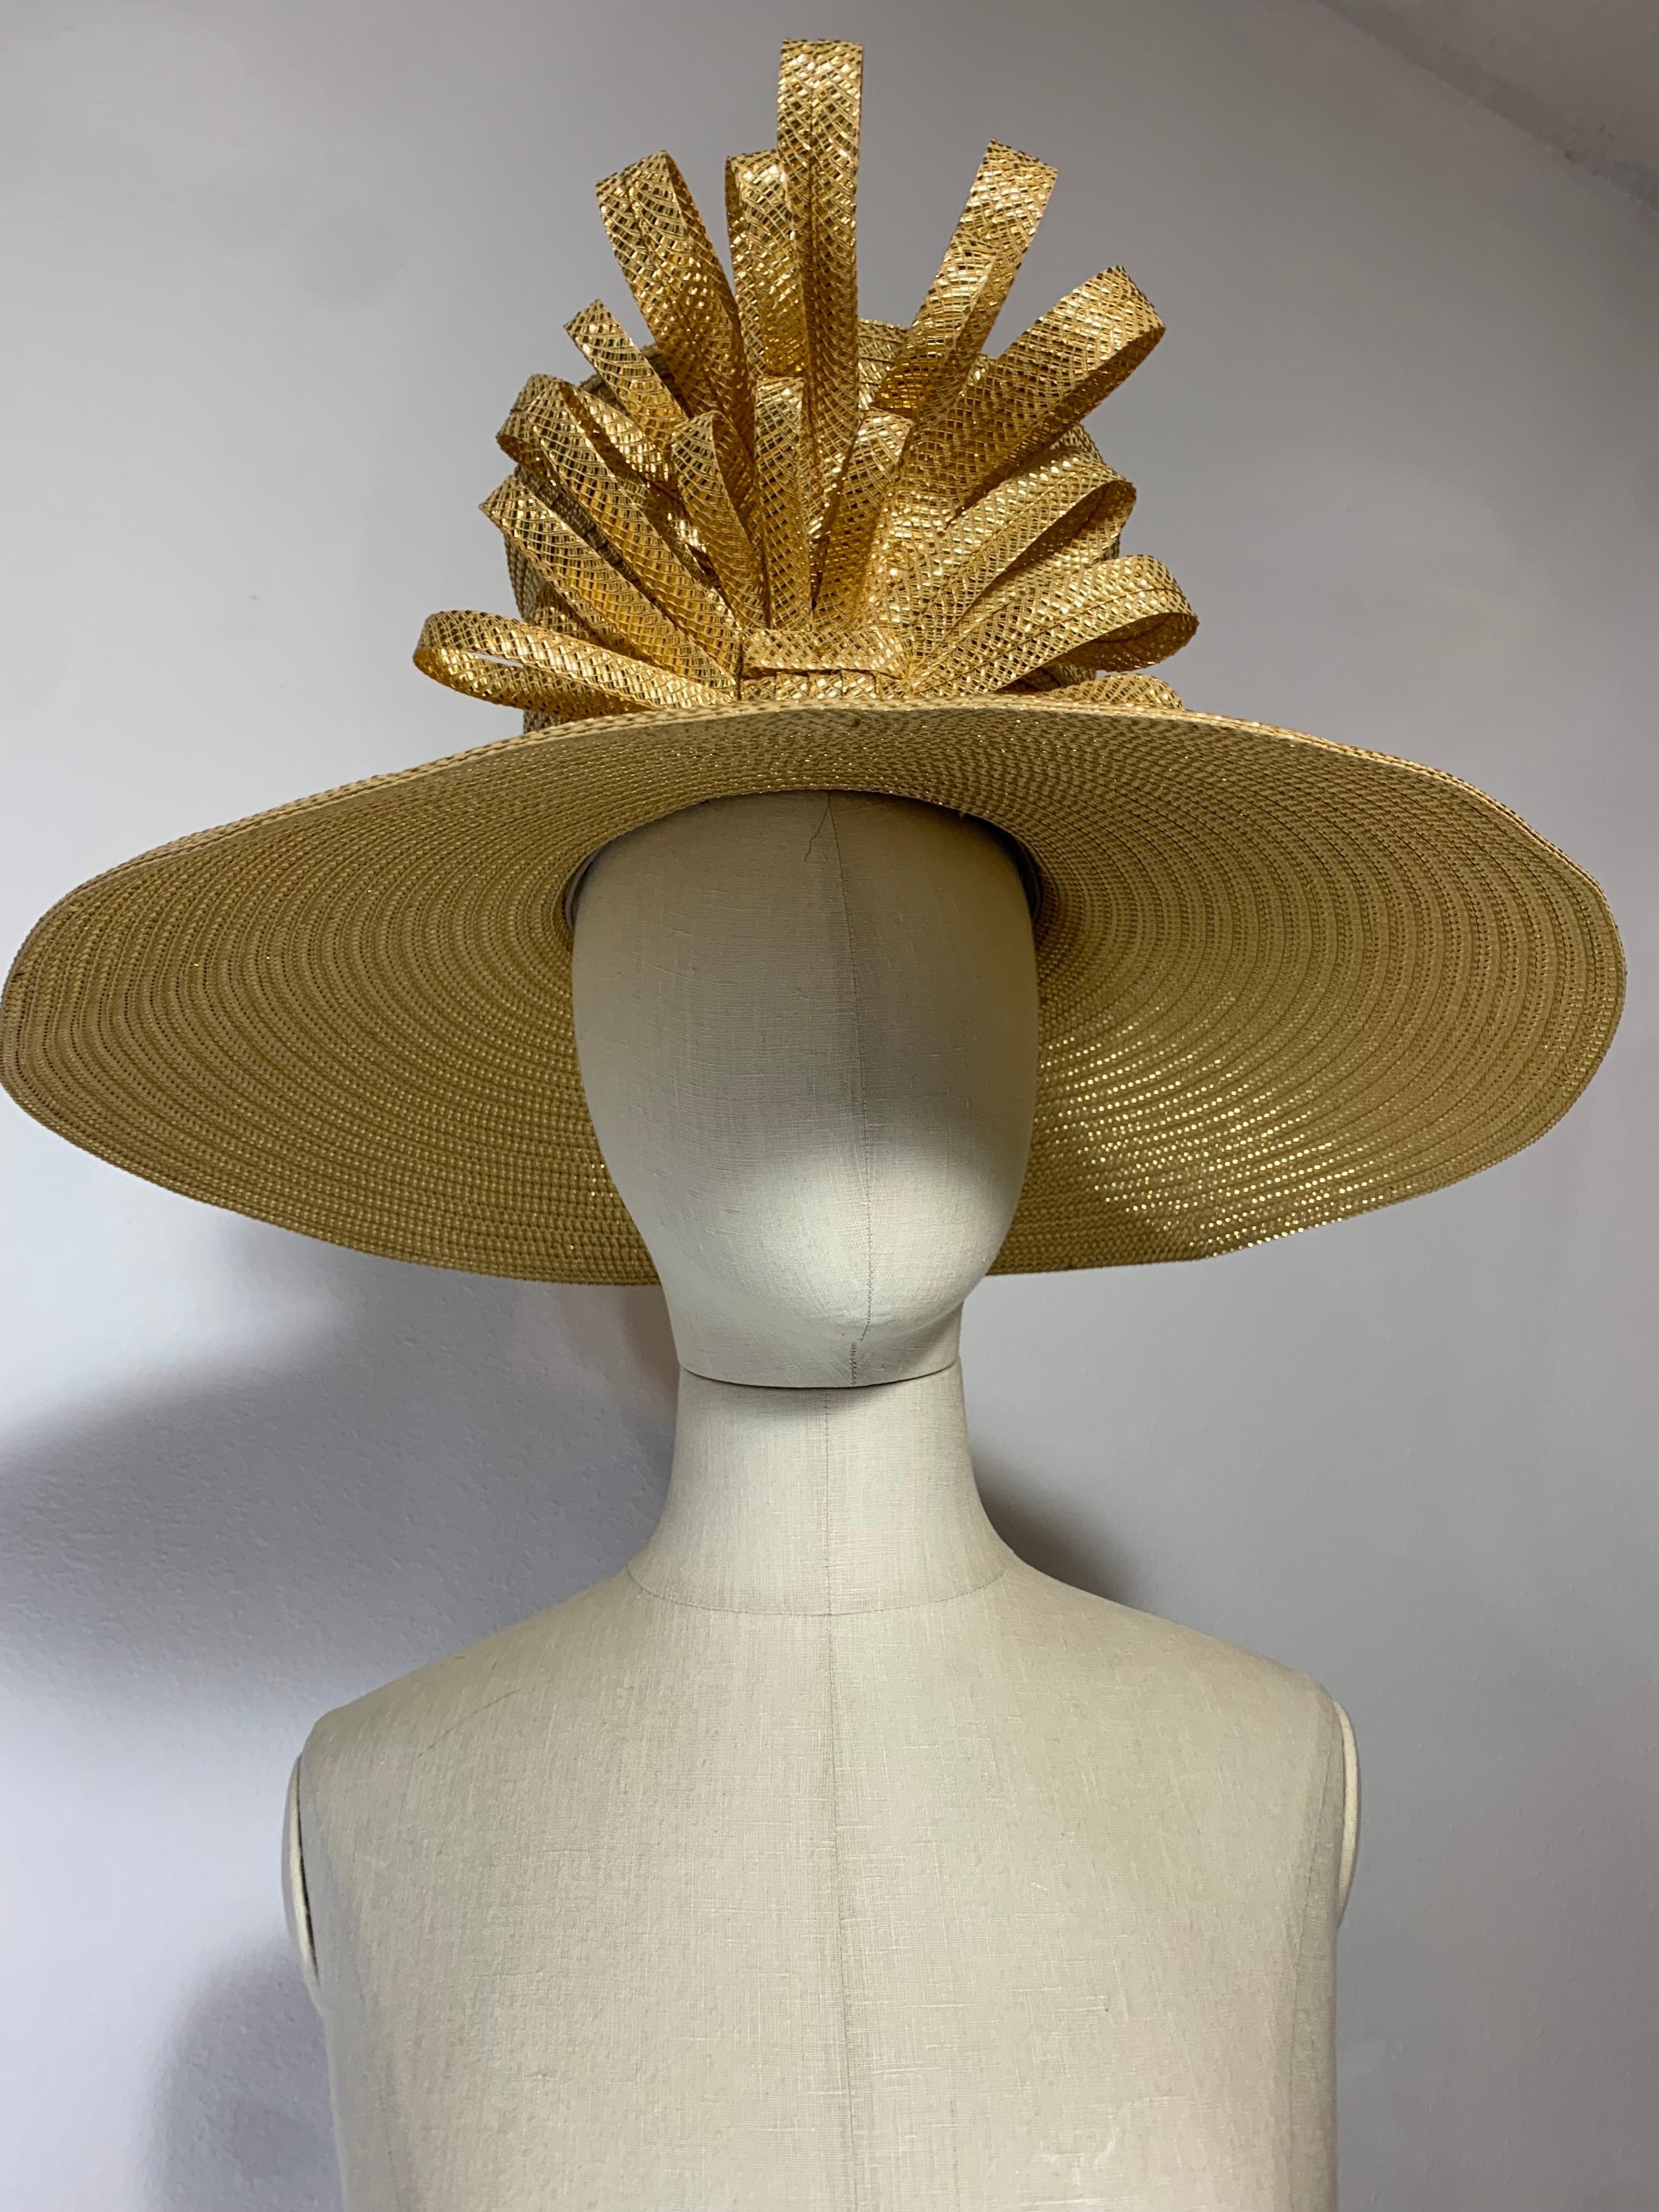 Custom Made Gleaming Gold Large Brimmed Straw Hat w High Crown & Straw Cockade:  Stunning bright gold lame colored straw hat with wide upturned brim, tall body, slightly rounded crown and looped straw cockade embellishment. Brim measures 21 1/2